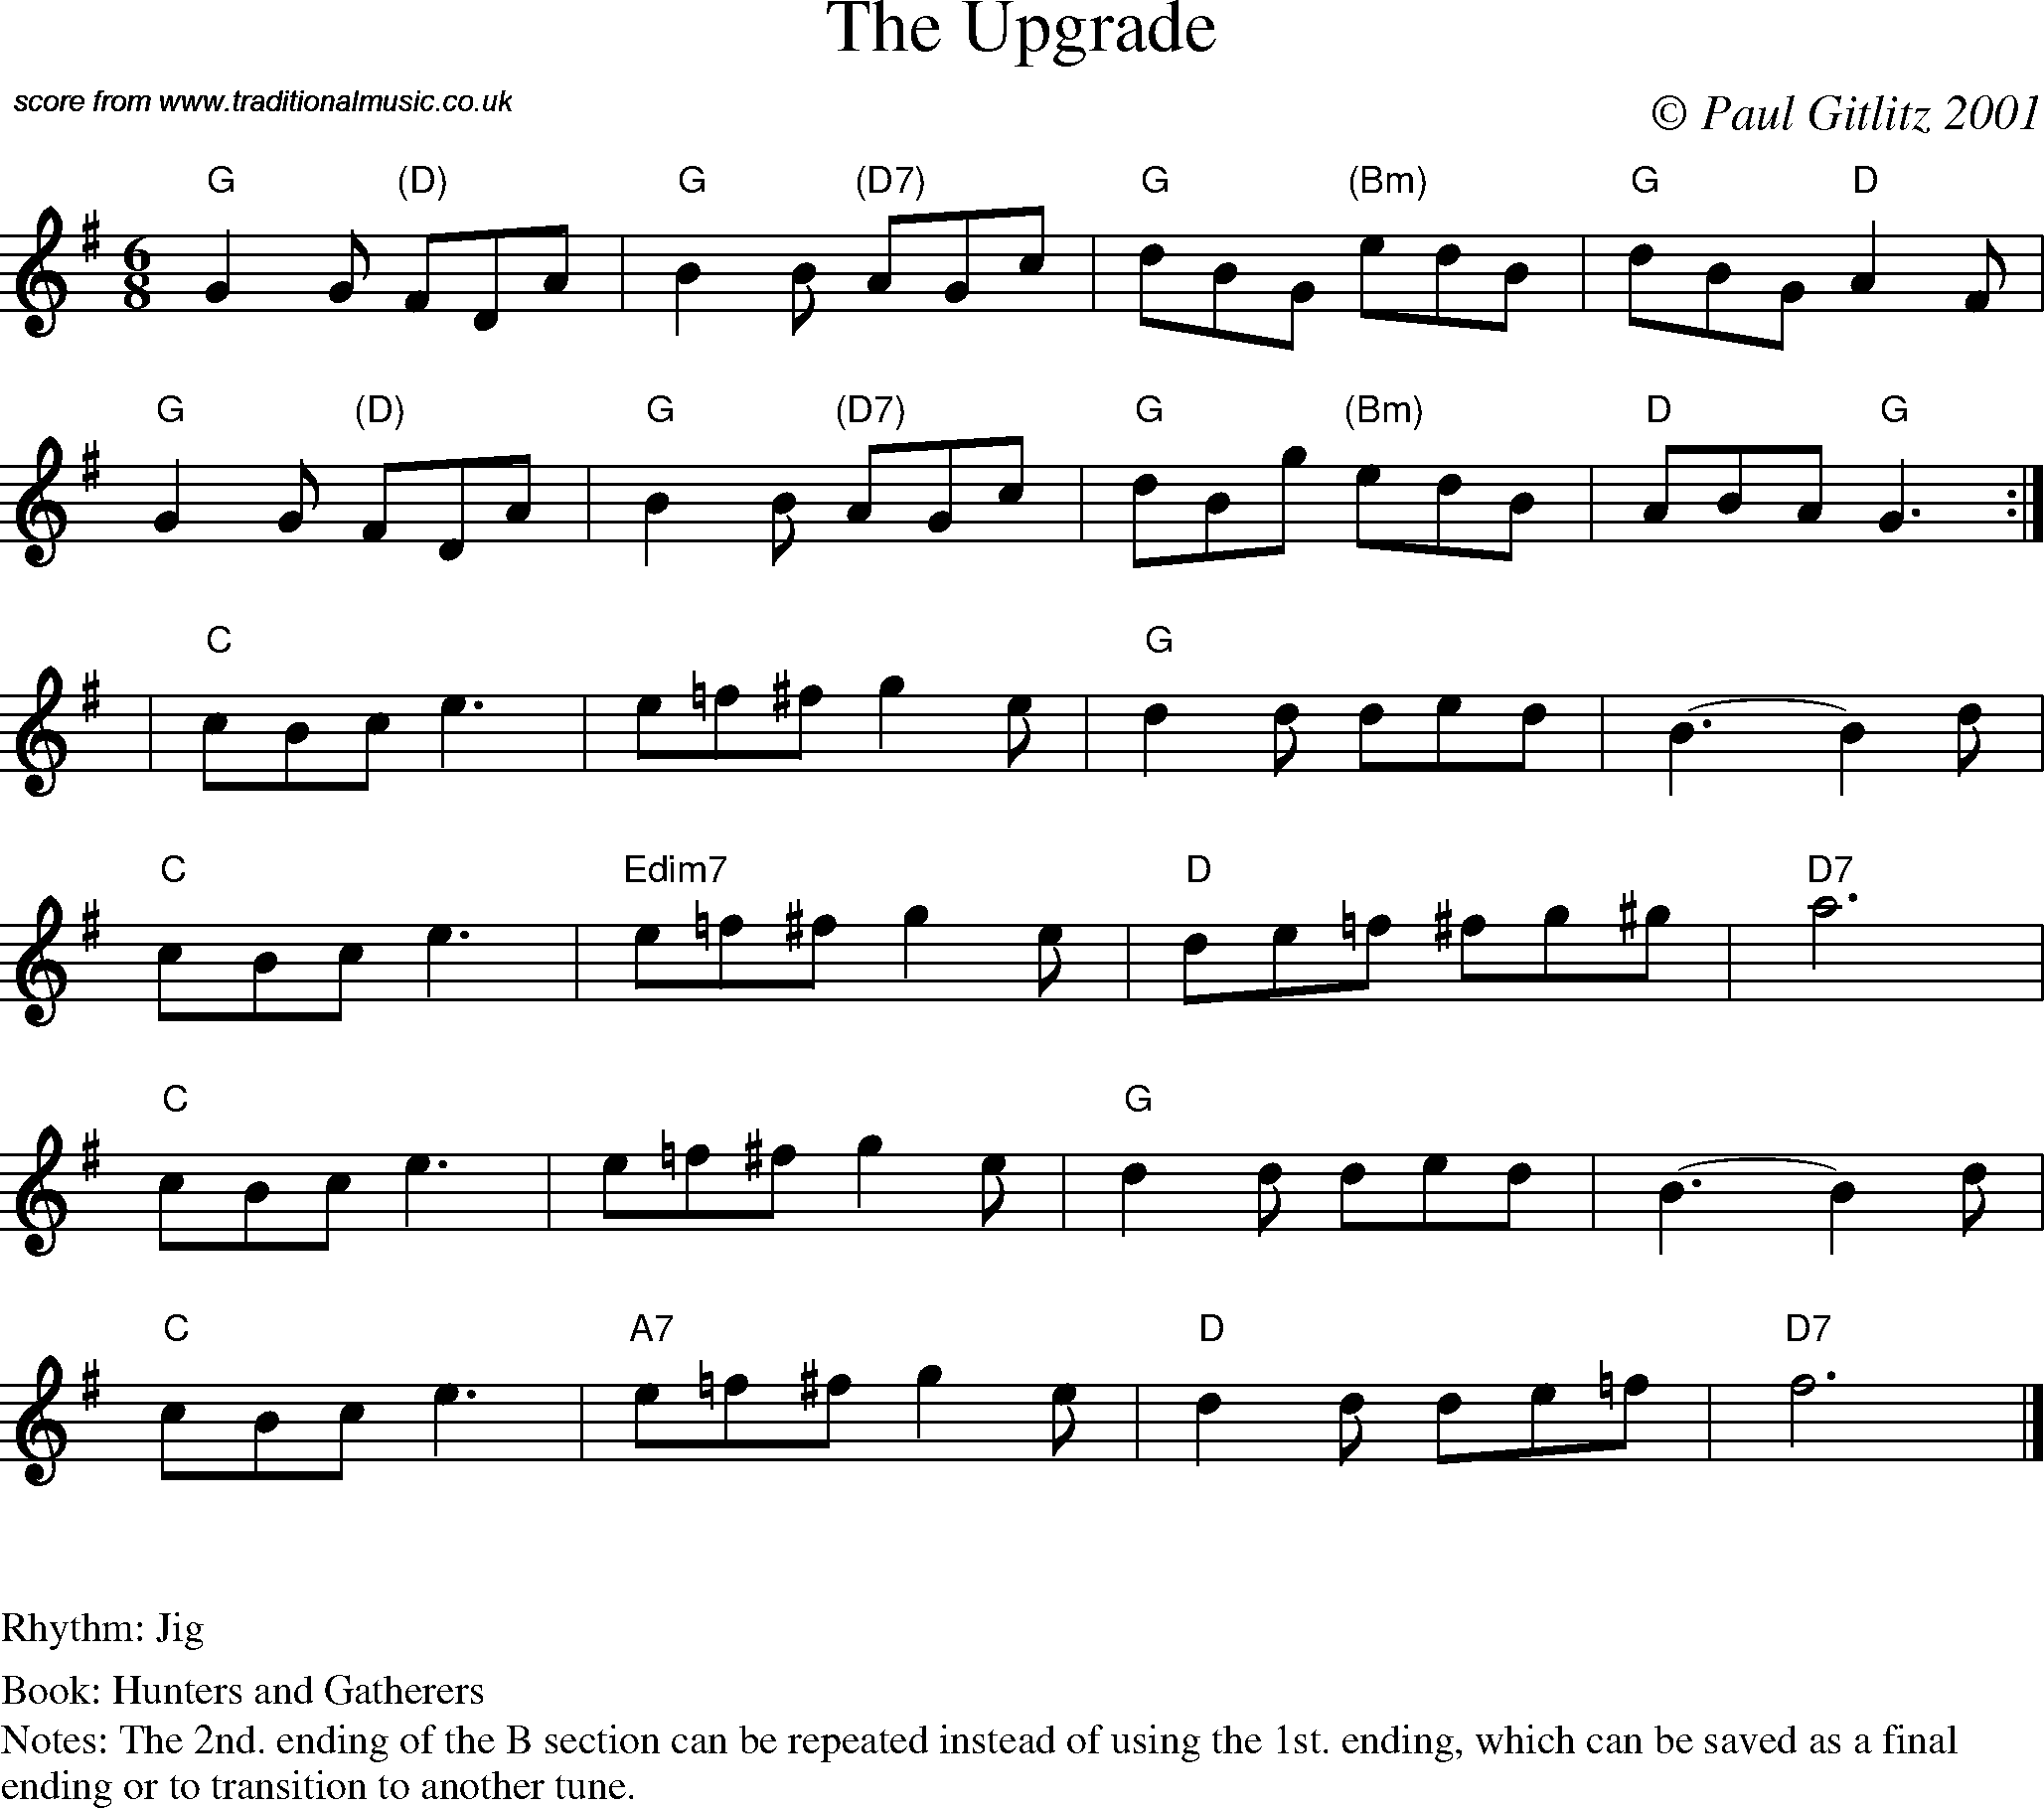 Sheet Music Score for Jig - The Upgrade